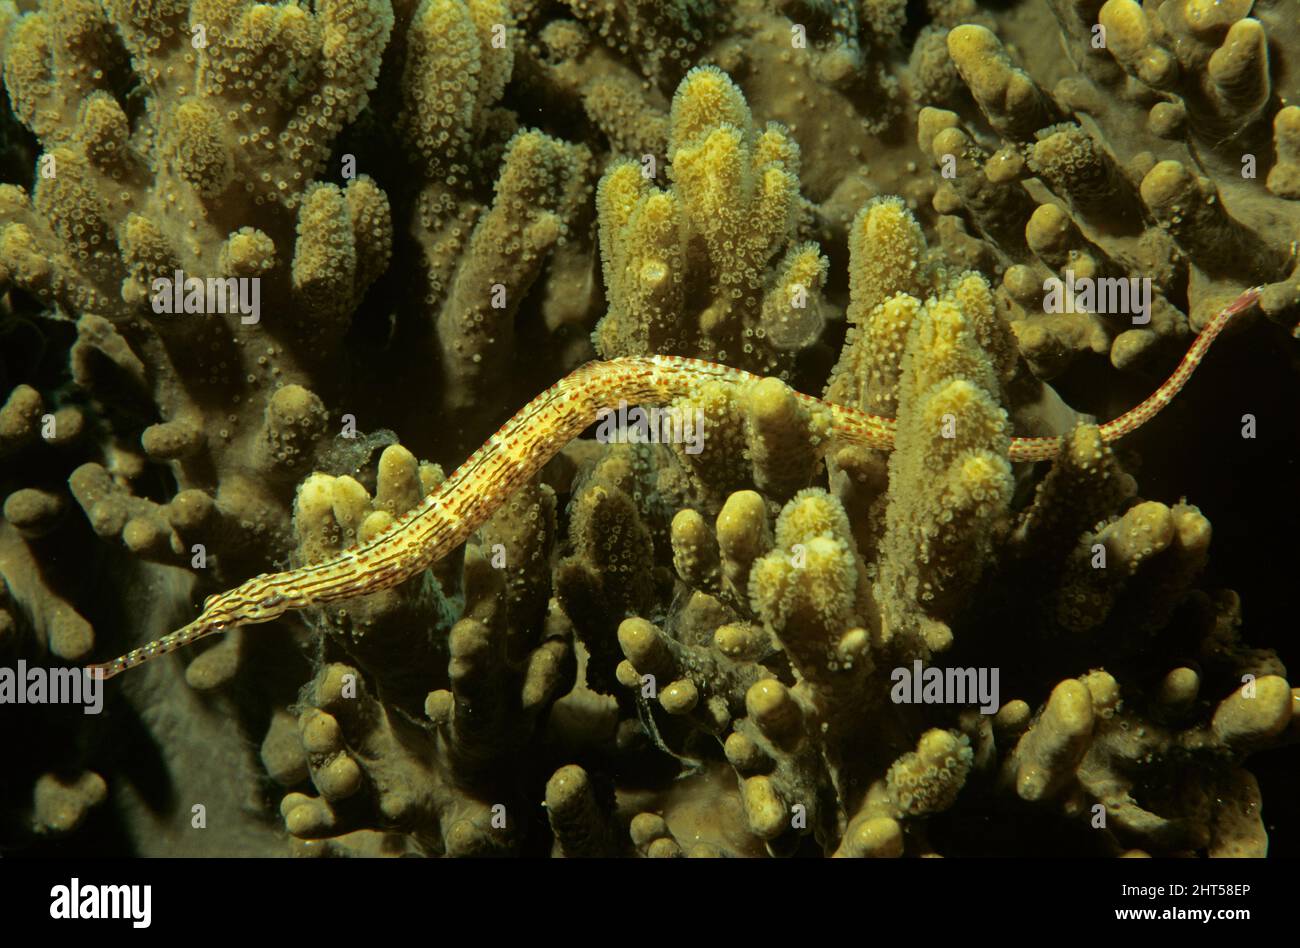 Pipefish hunting on leather coral  (Corythoichthys schultzi),  hunting on leather coral.  Ambon, Indoneisa Stock Photo